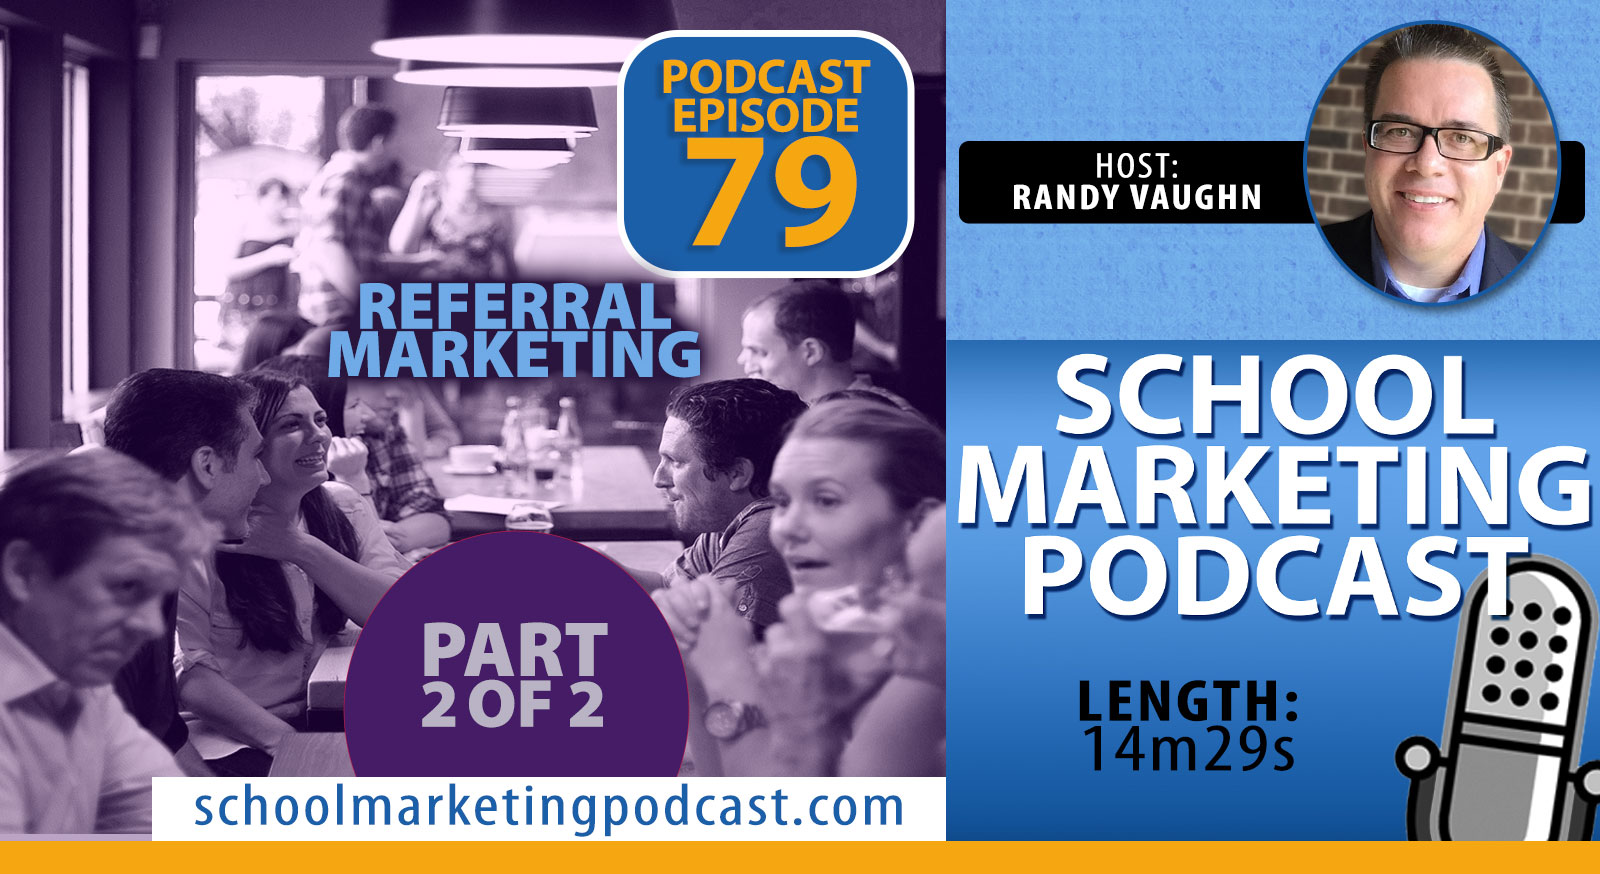 Podcast - Referral Marketing & WOM - Part 2 of 2